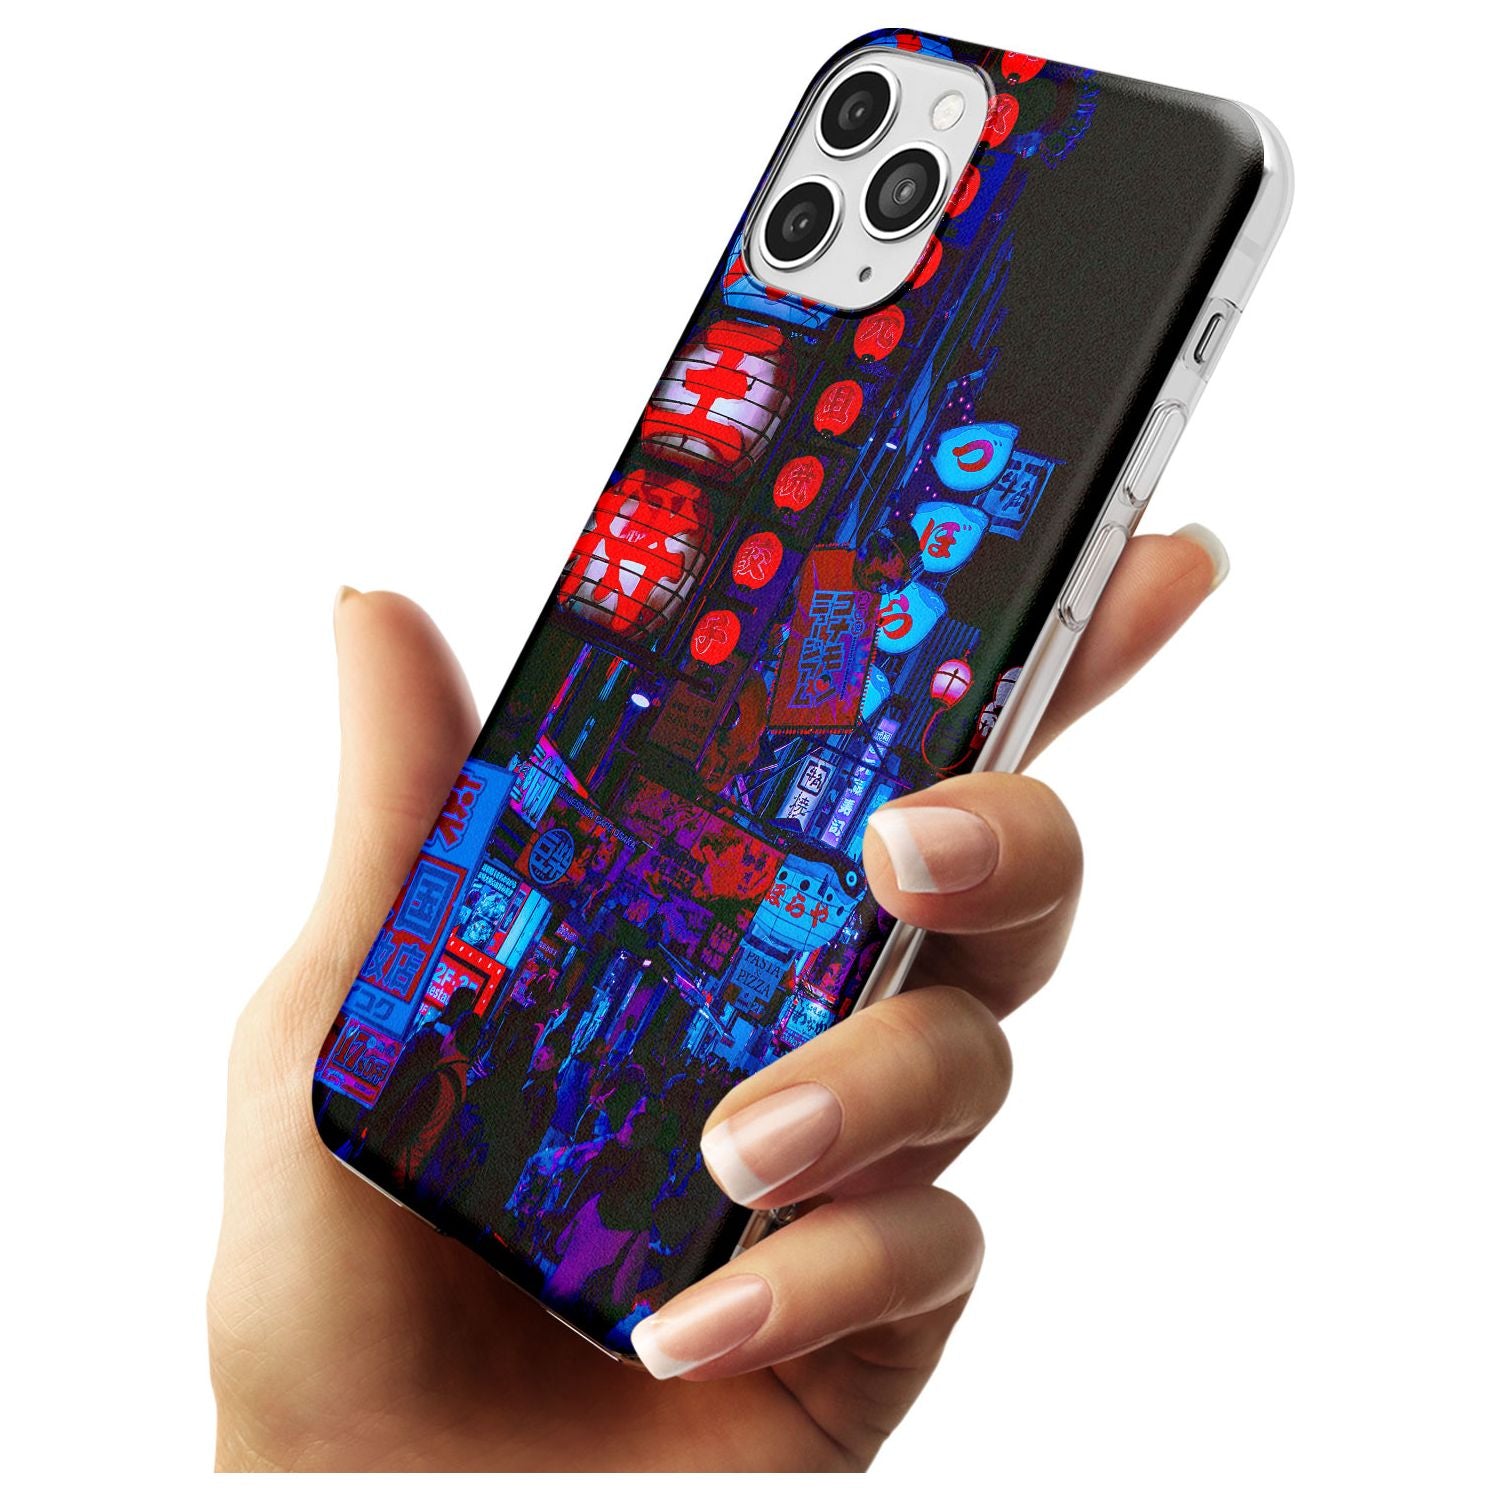 Red & Turquoise - Neon Cities Photographs Slim TPU Phone Case for iPhone 11 Pro Max